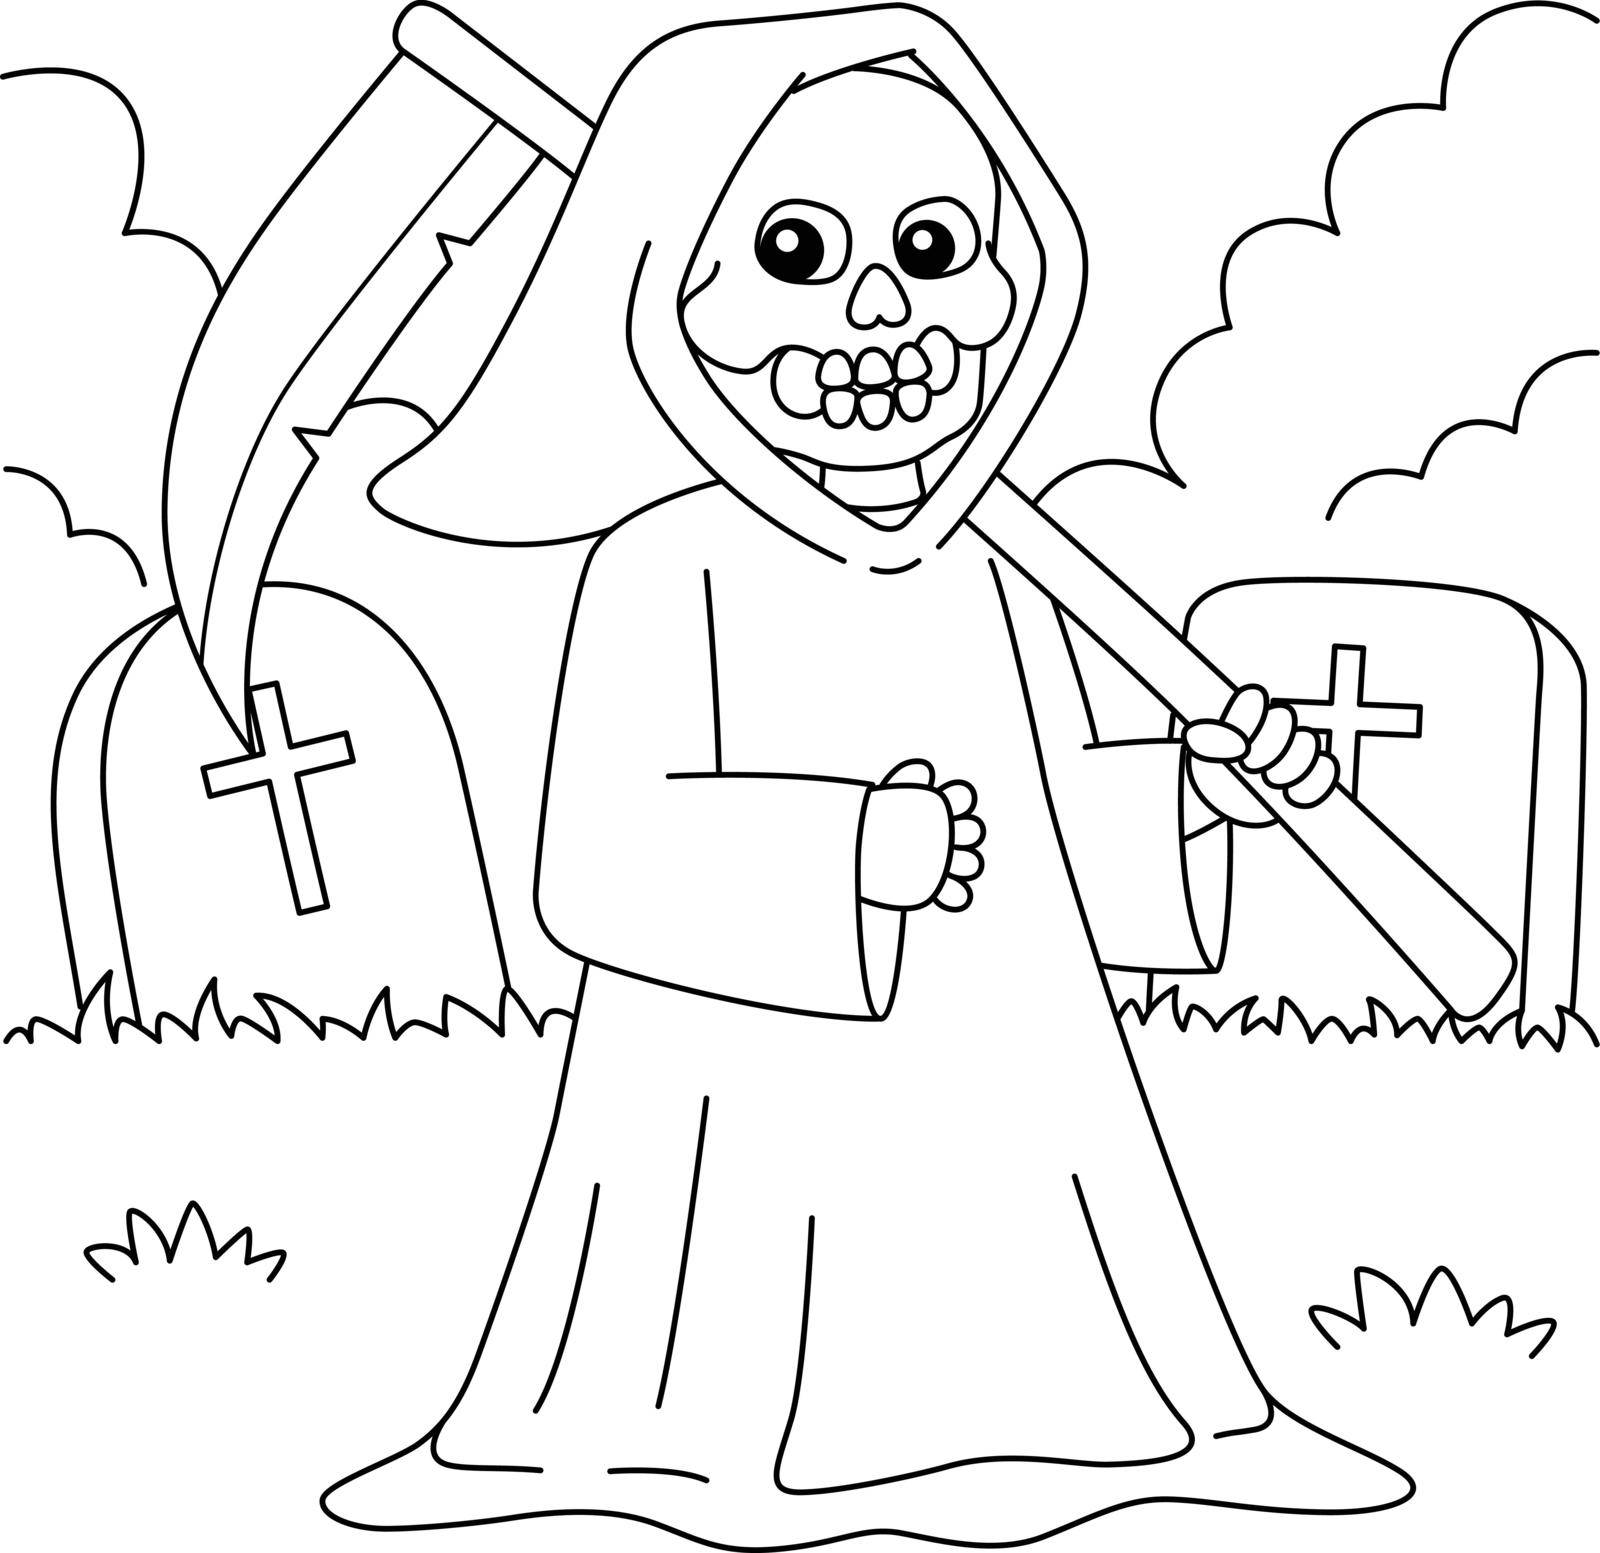 Grim Reaper Halloween Coloring Page for Kids by abbydesign